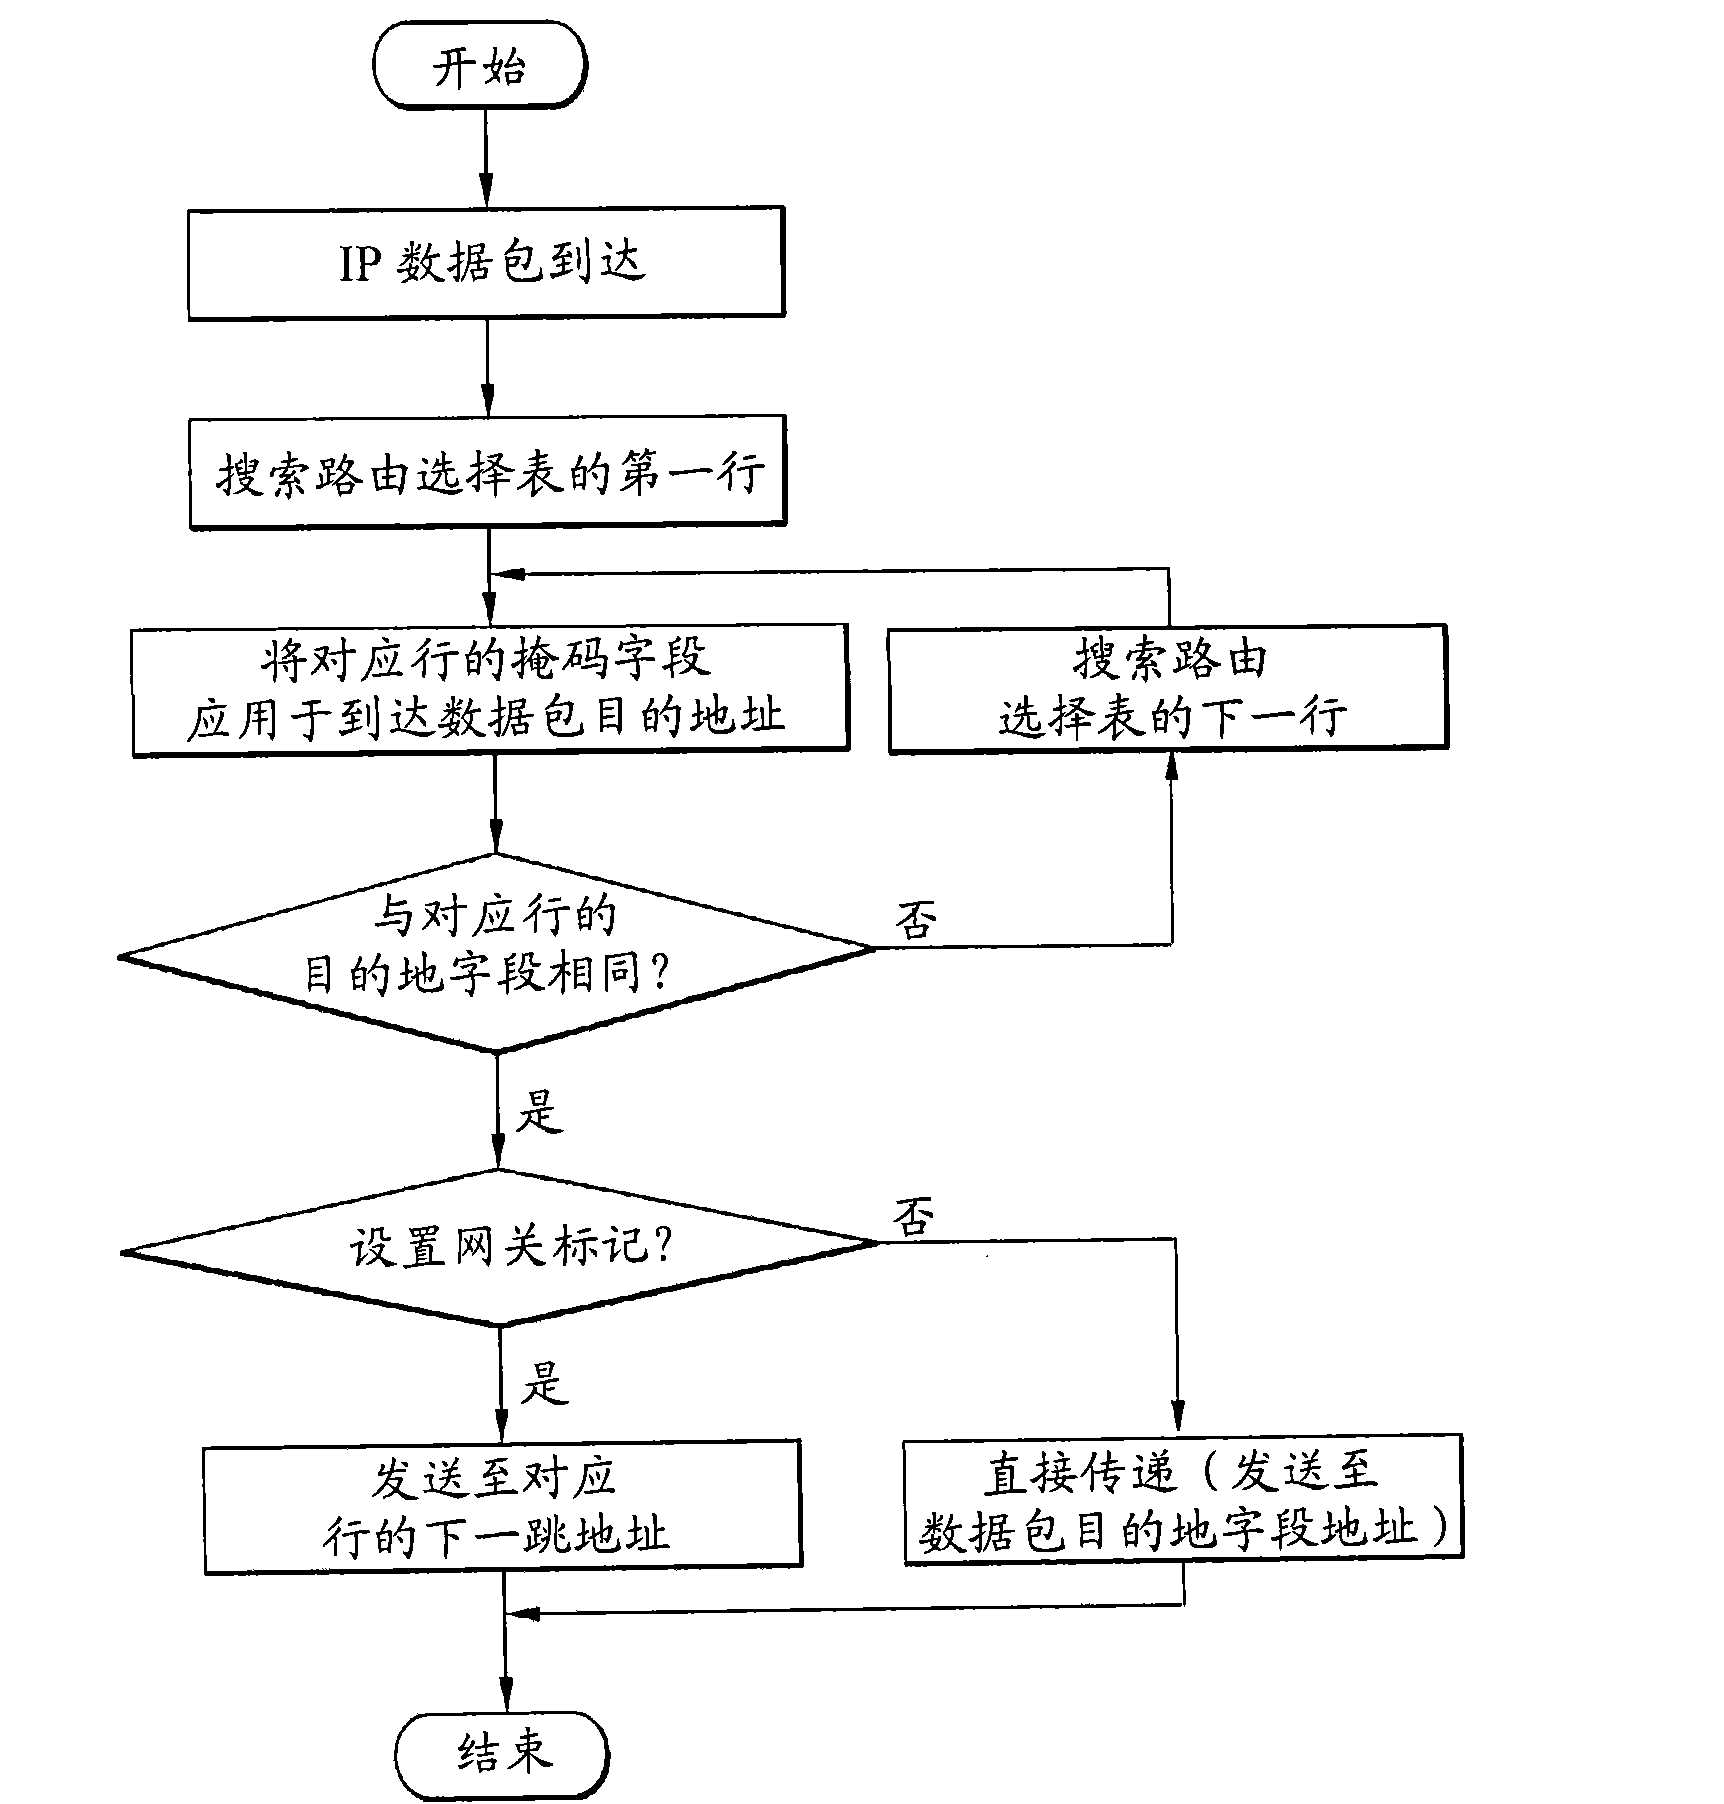 Router and routing method for portable internet service